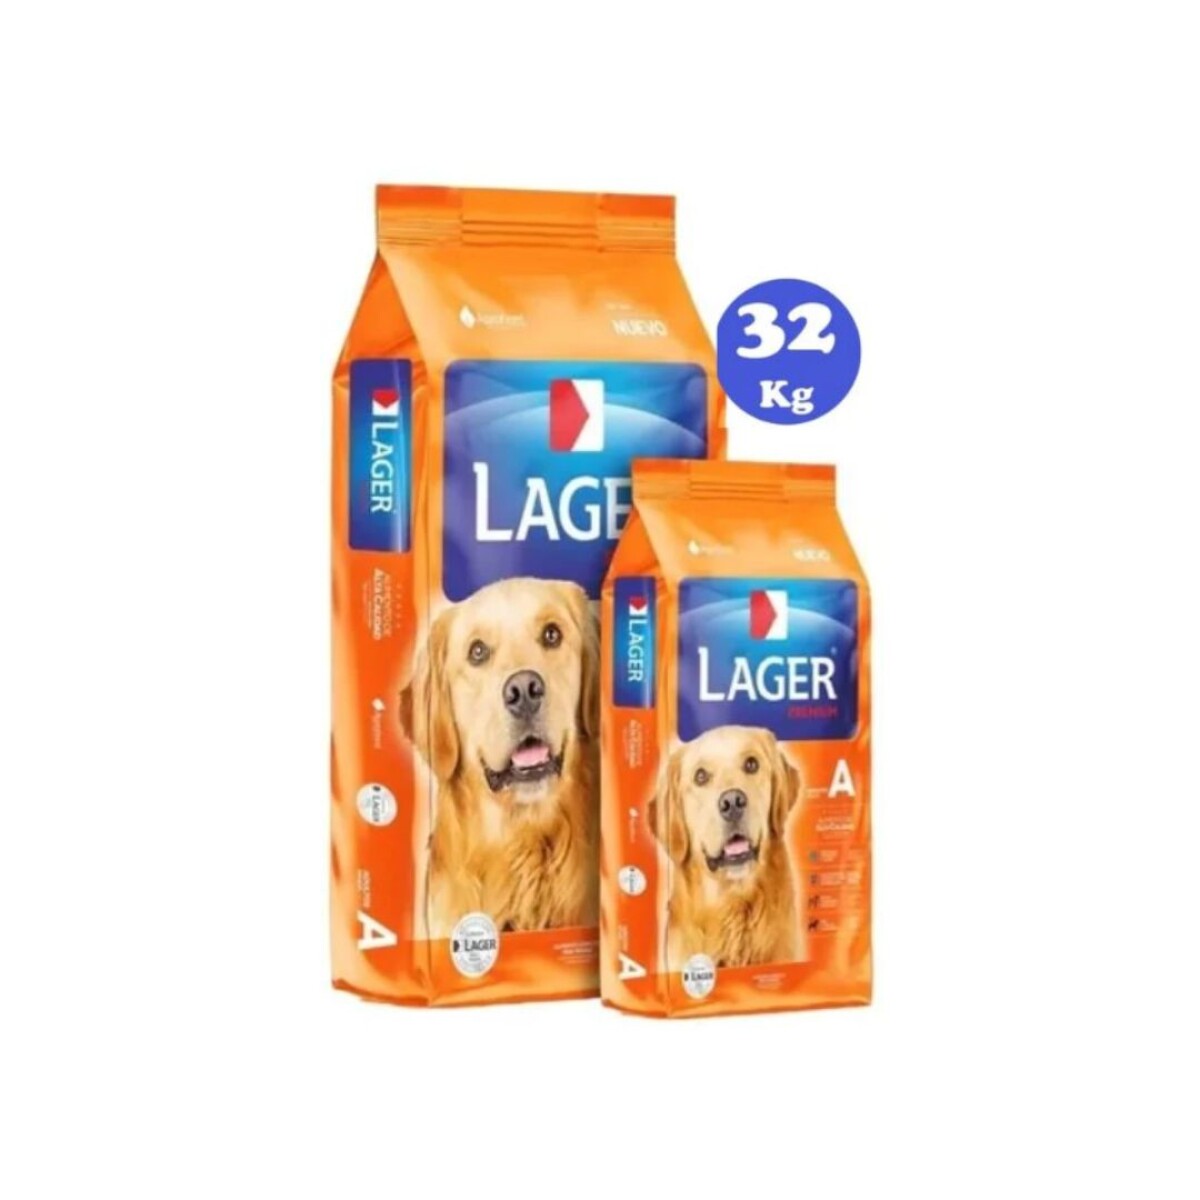 LAGER ADULTO 22 + 10 KG - Unica 